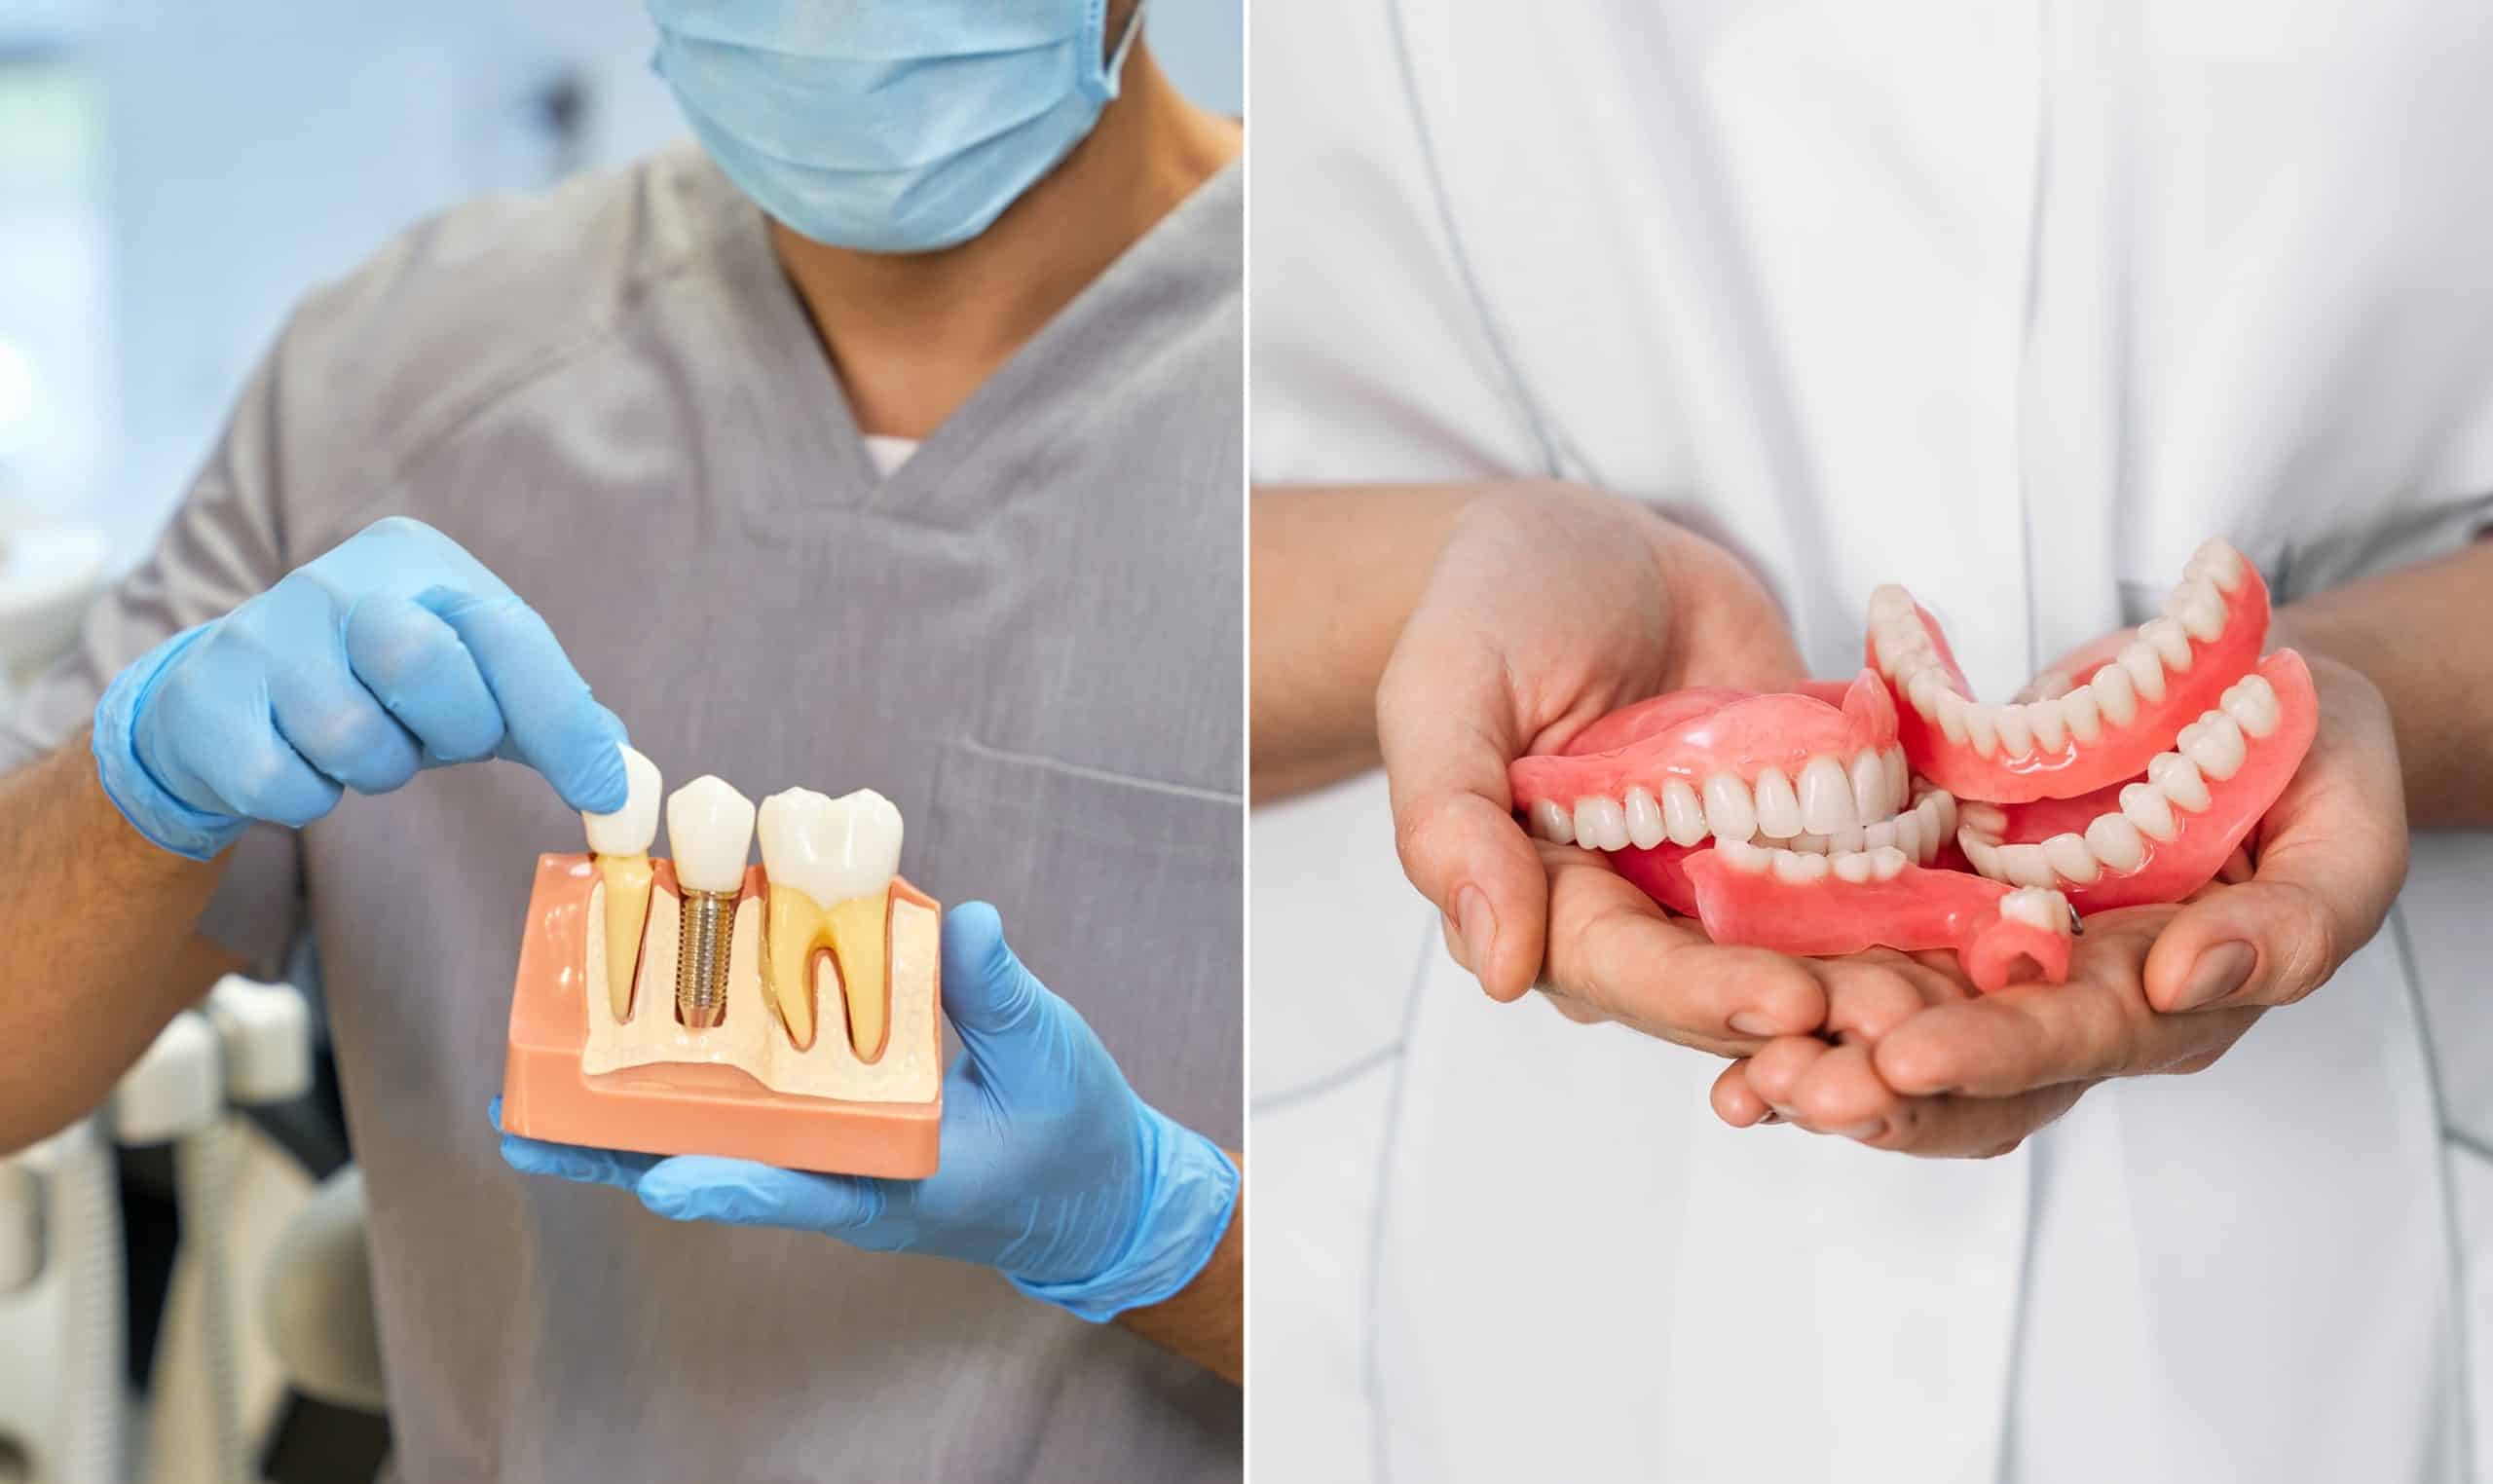 Comparing Dental Implants and Dentures